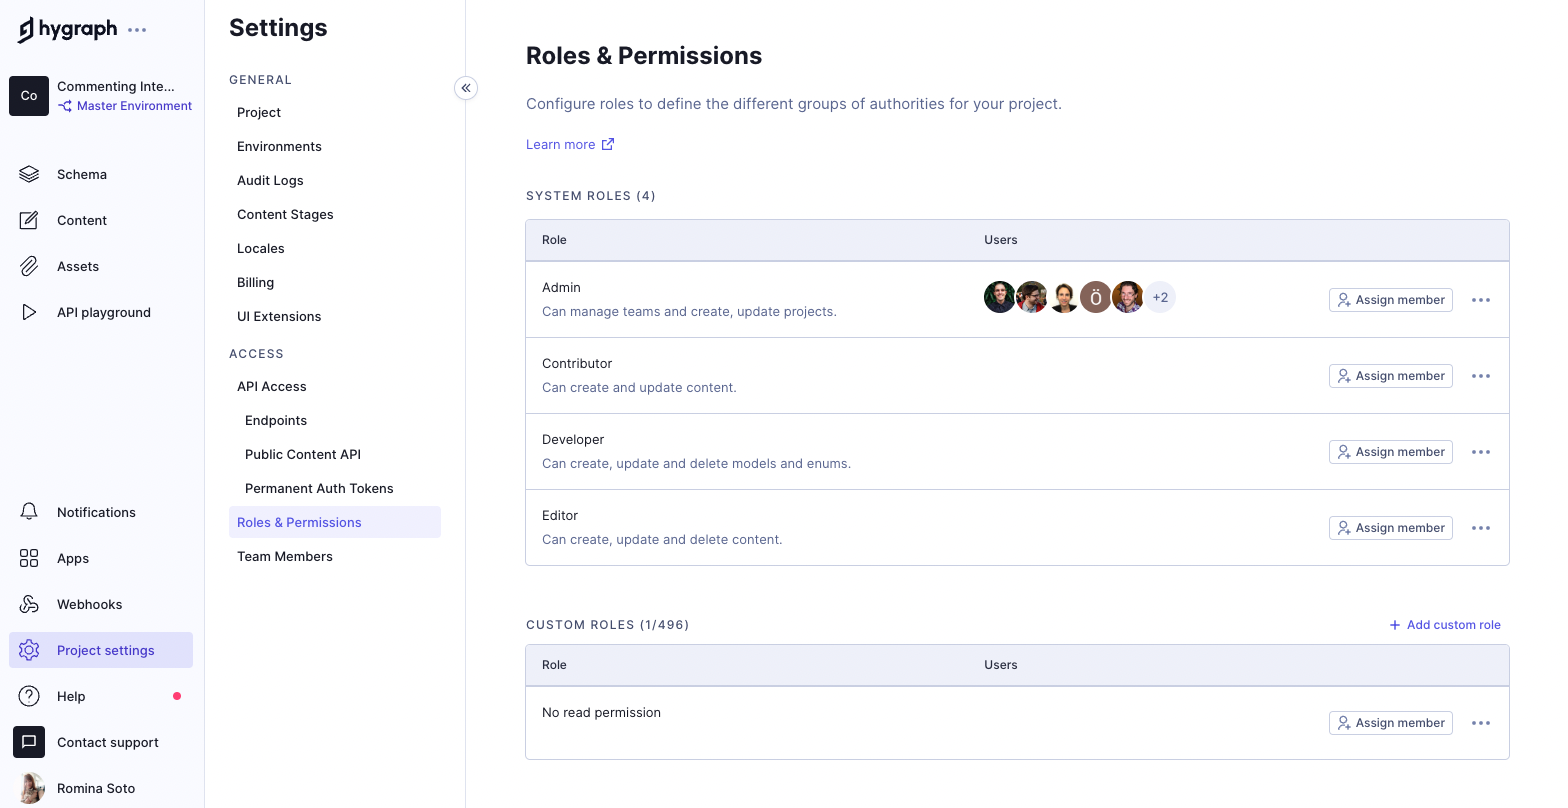 Roles and Permissions overview